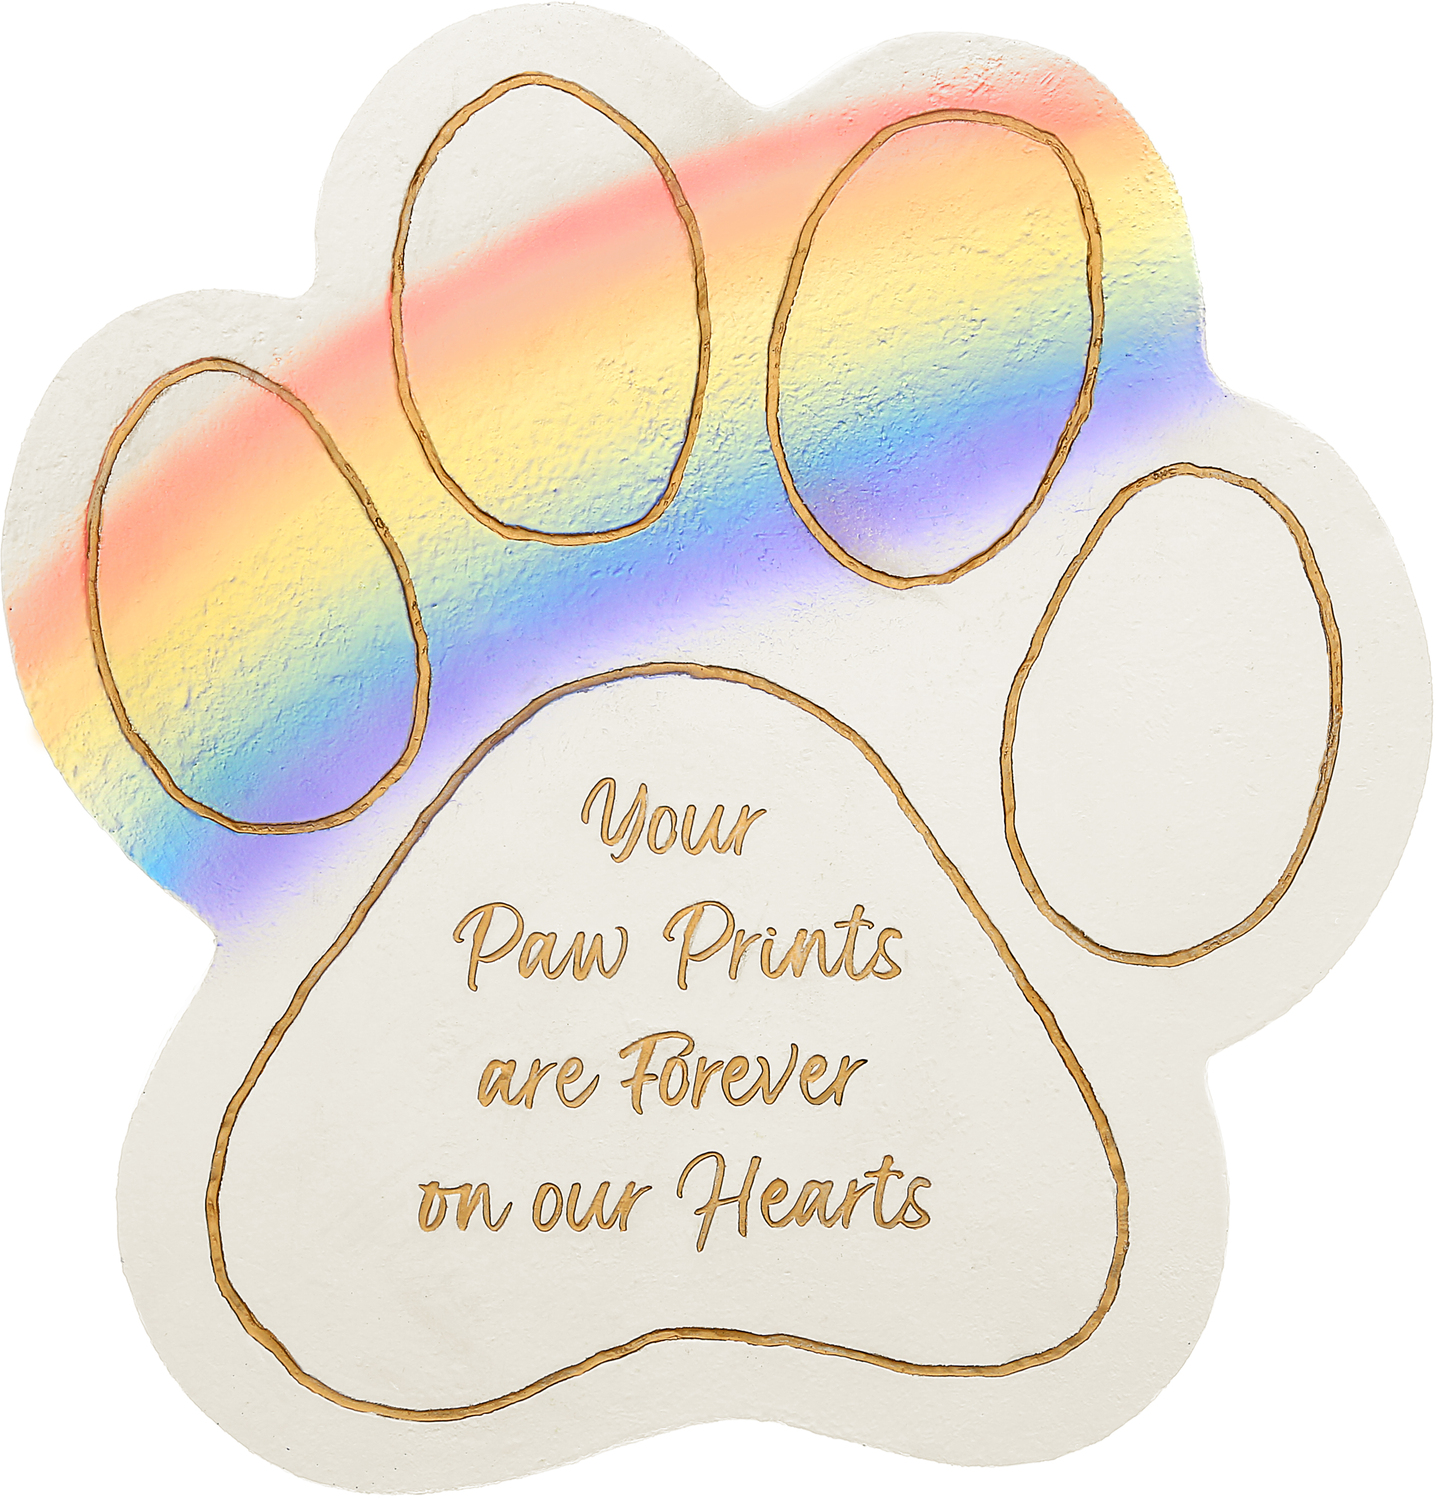 Pawprints by Forever in our Hearts - Pawprints - 11" Pawprint Garden Stone